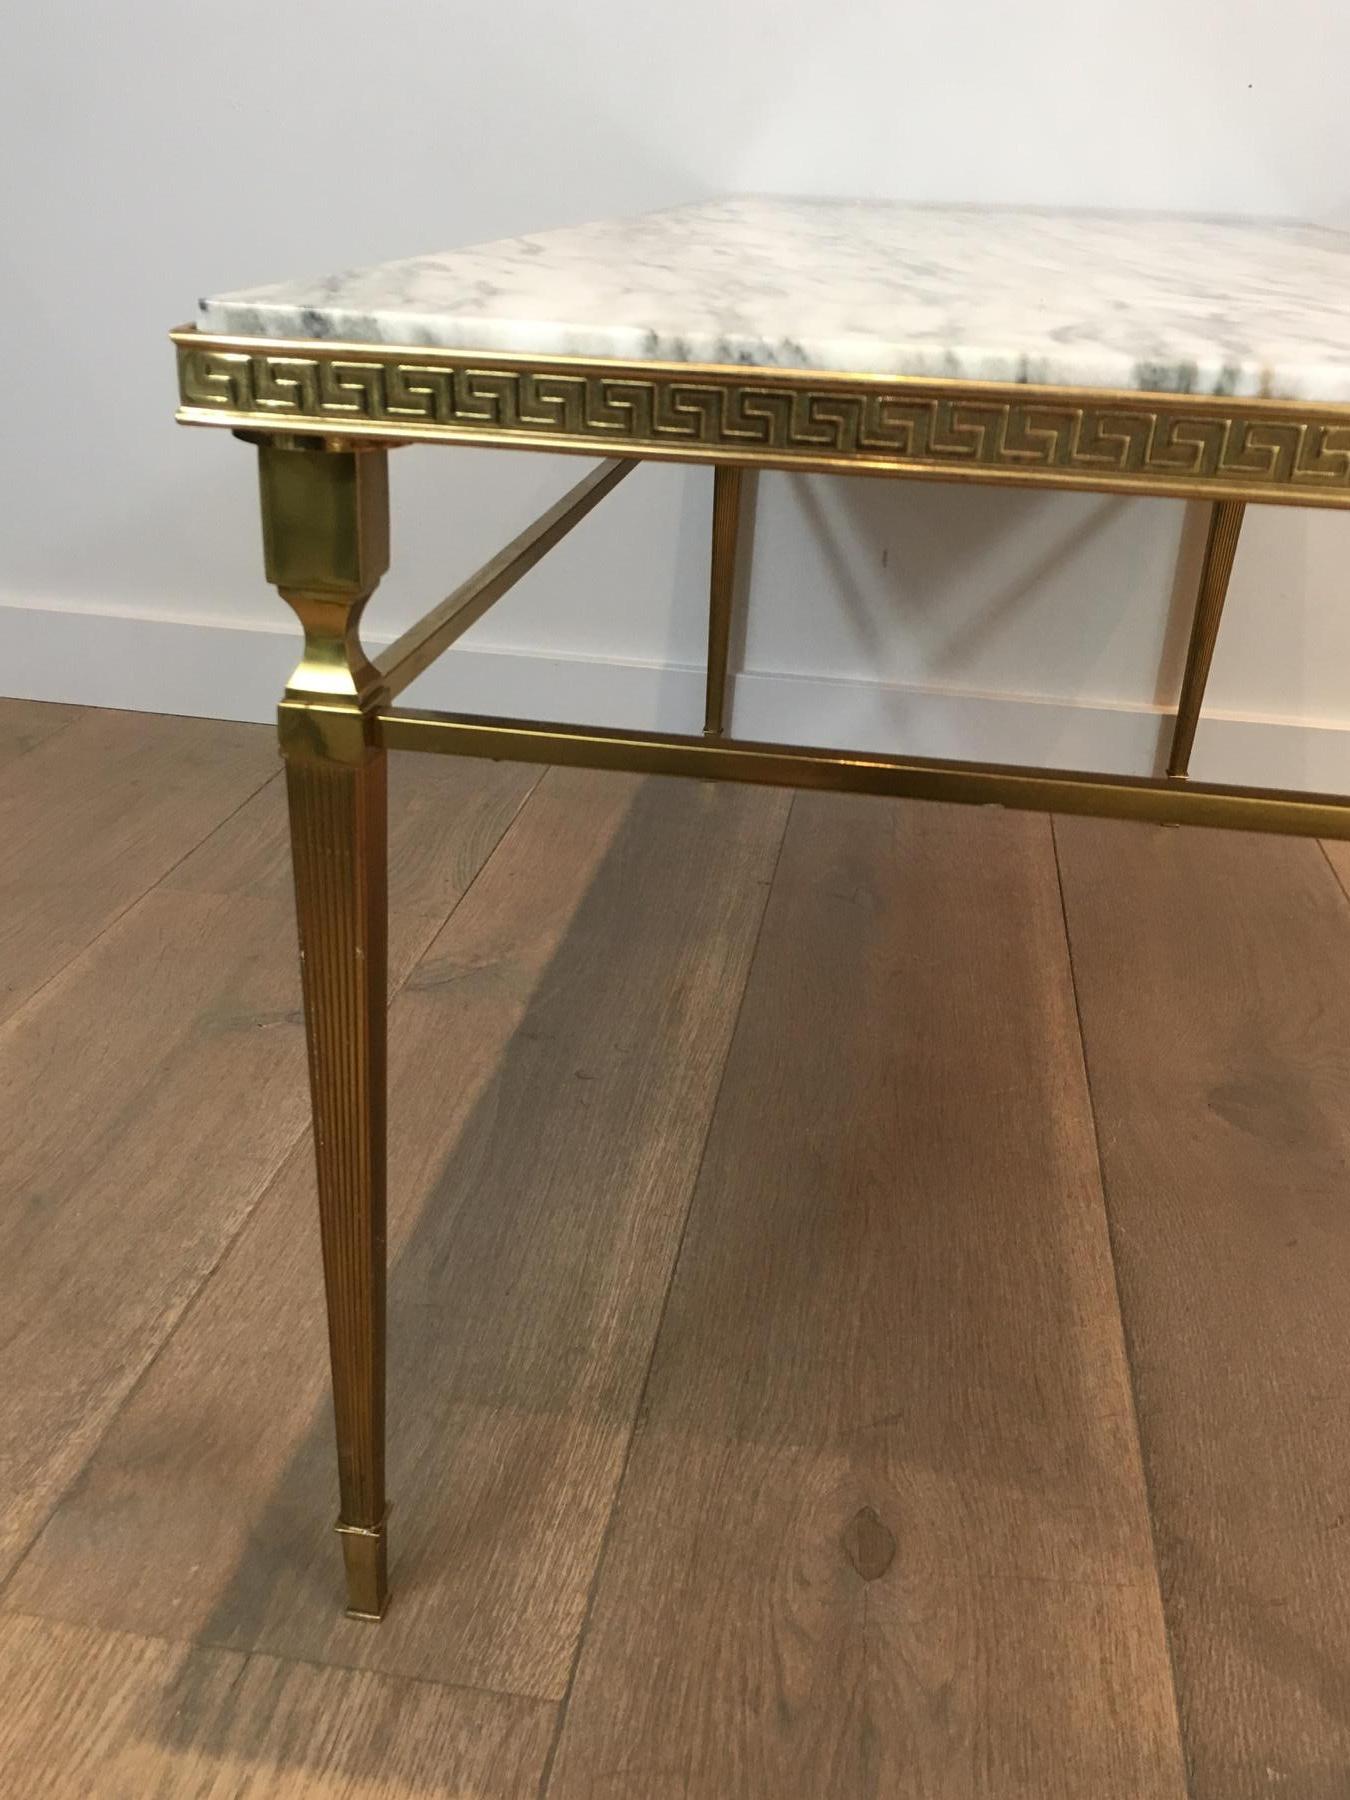 Mid-20th Century Attributed to Maison Jansen, Neoclassical Brass Coffee Table with Marble Top